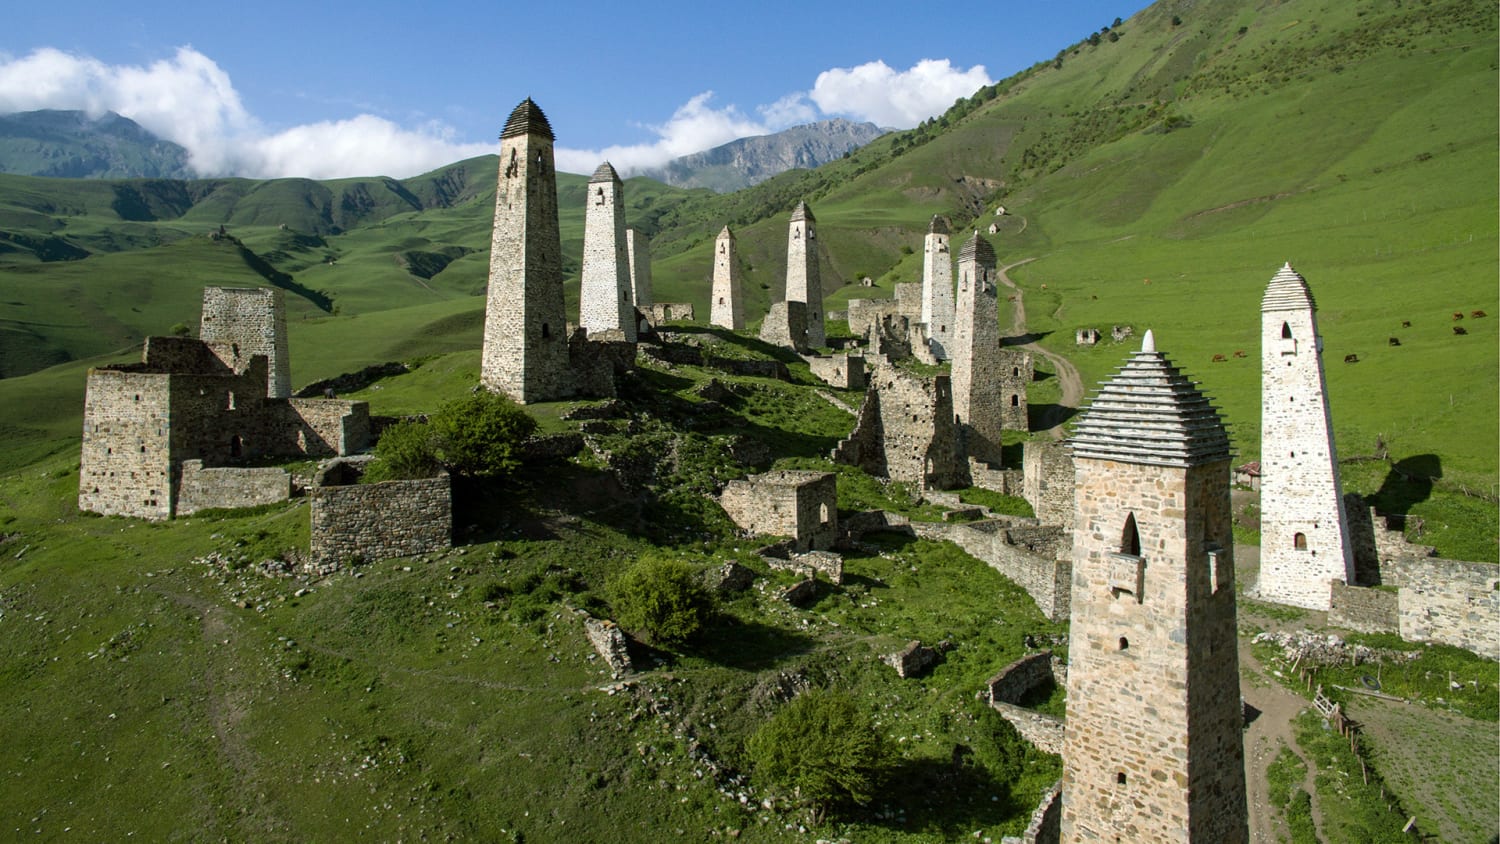 The medieval tower complex Erzi in Ingushetia, Russia, built for defensive and domestic use between the 14th and the 17th centuries CE. Towers were traditionally built in a period lasting no more than 365 days, with every well-to-do family in a community obliged to construct one